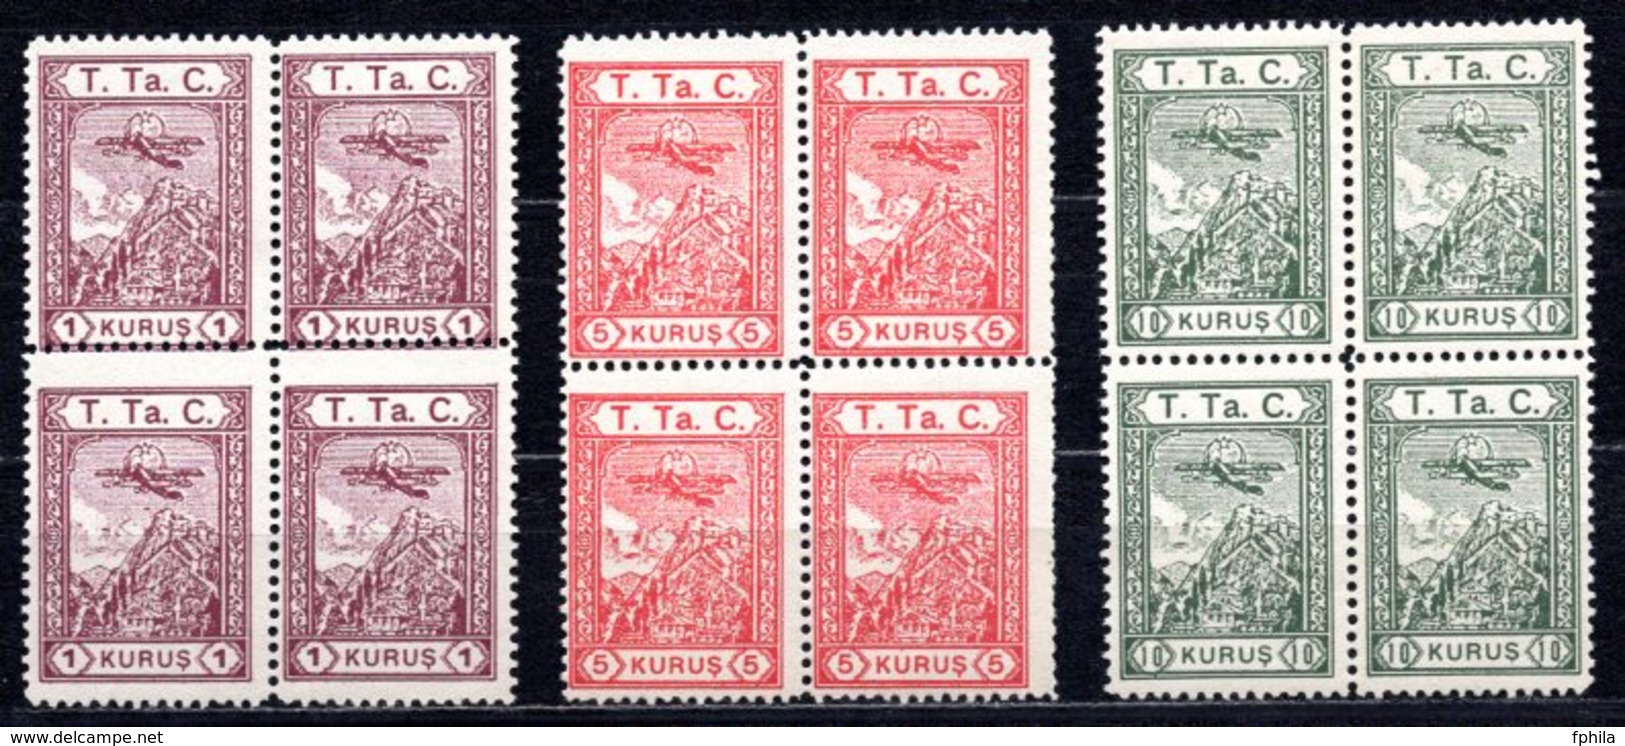 1932 TURKEY STAMPS IN AID OF THE TURKISH AVIATION SOCIETY BLOCK OF 4 MNH ** - Timbres De Bienfaisance